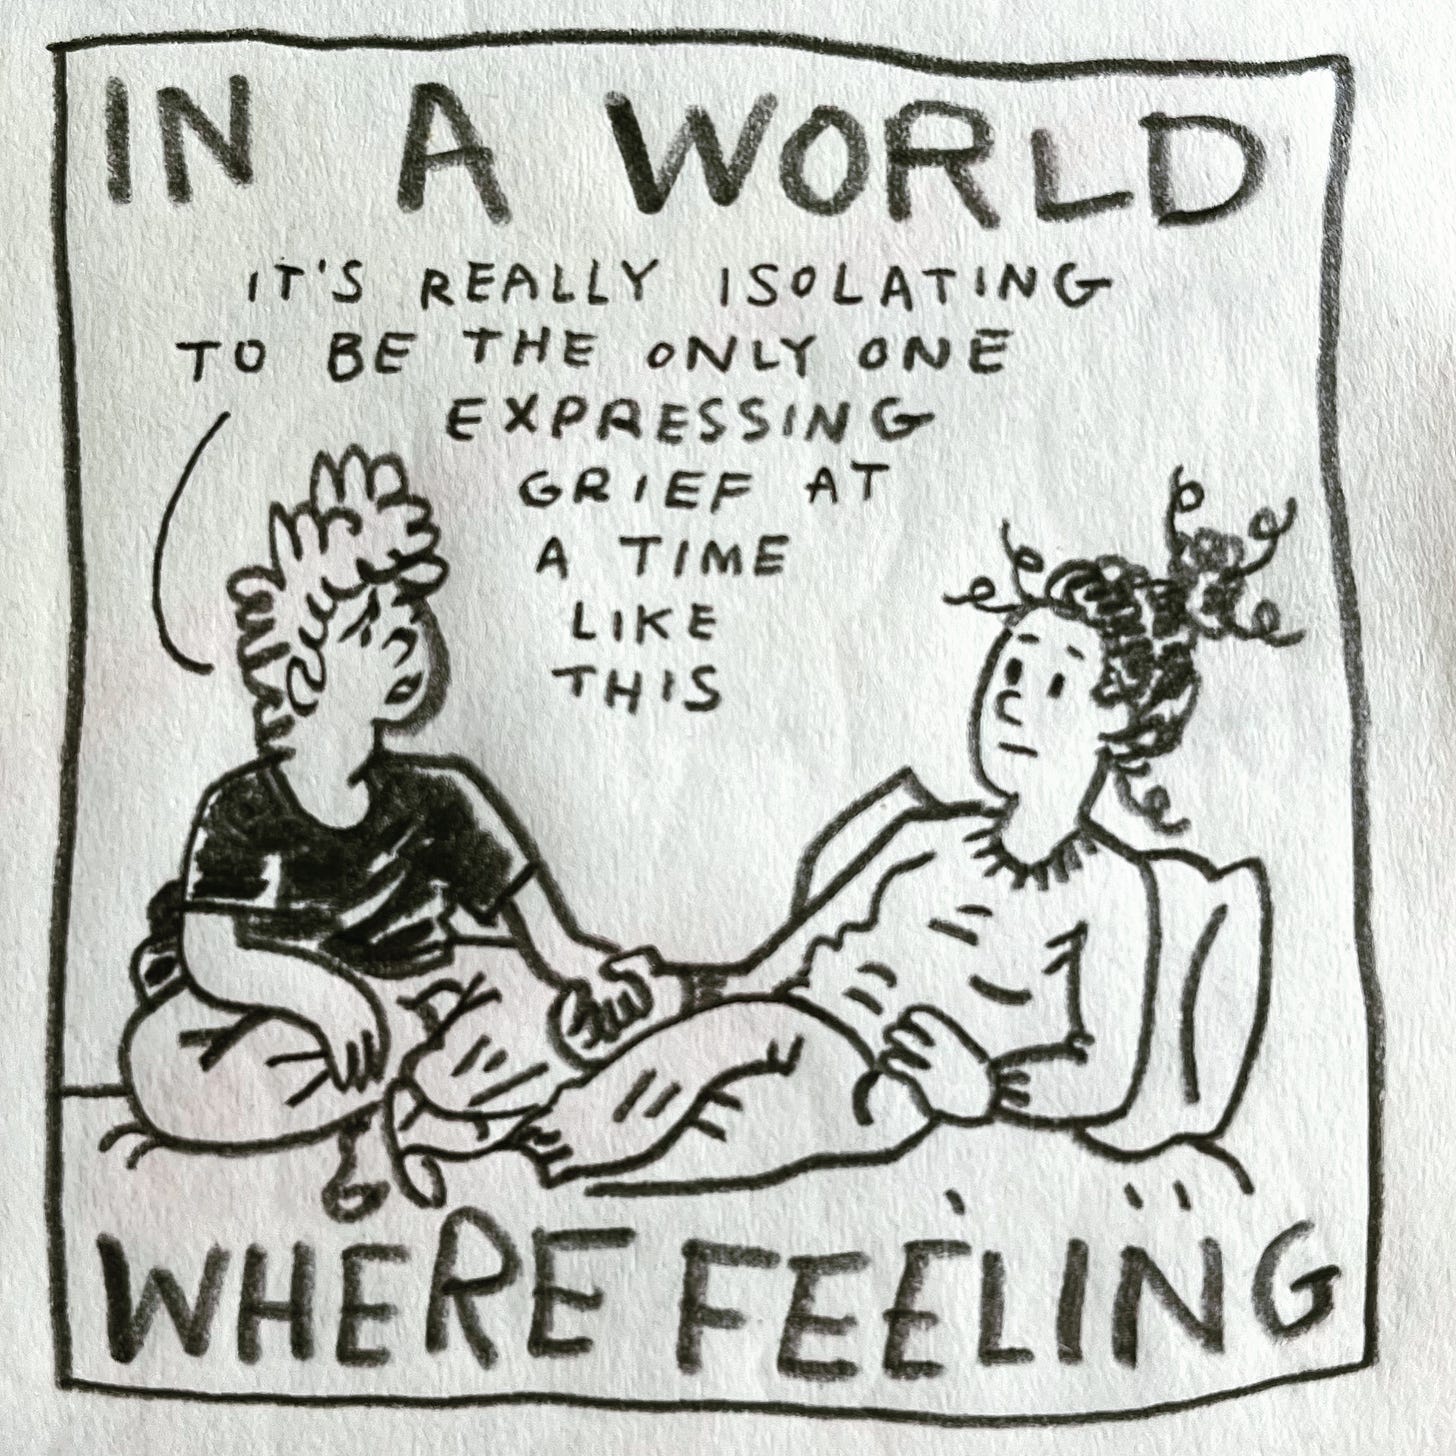 Panel 2: in a world where feeling Image: Lark sits cross-legged on a bed, holding hands with their sister, who is wearing a sweater, sweatpants and socks, leaning against a pillow against the wall. Lark is wearing a black T-shirt, sweatpants and socks. They frown, saying "it's really isolating to be the only one expressing grief at a time like this"